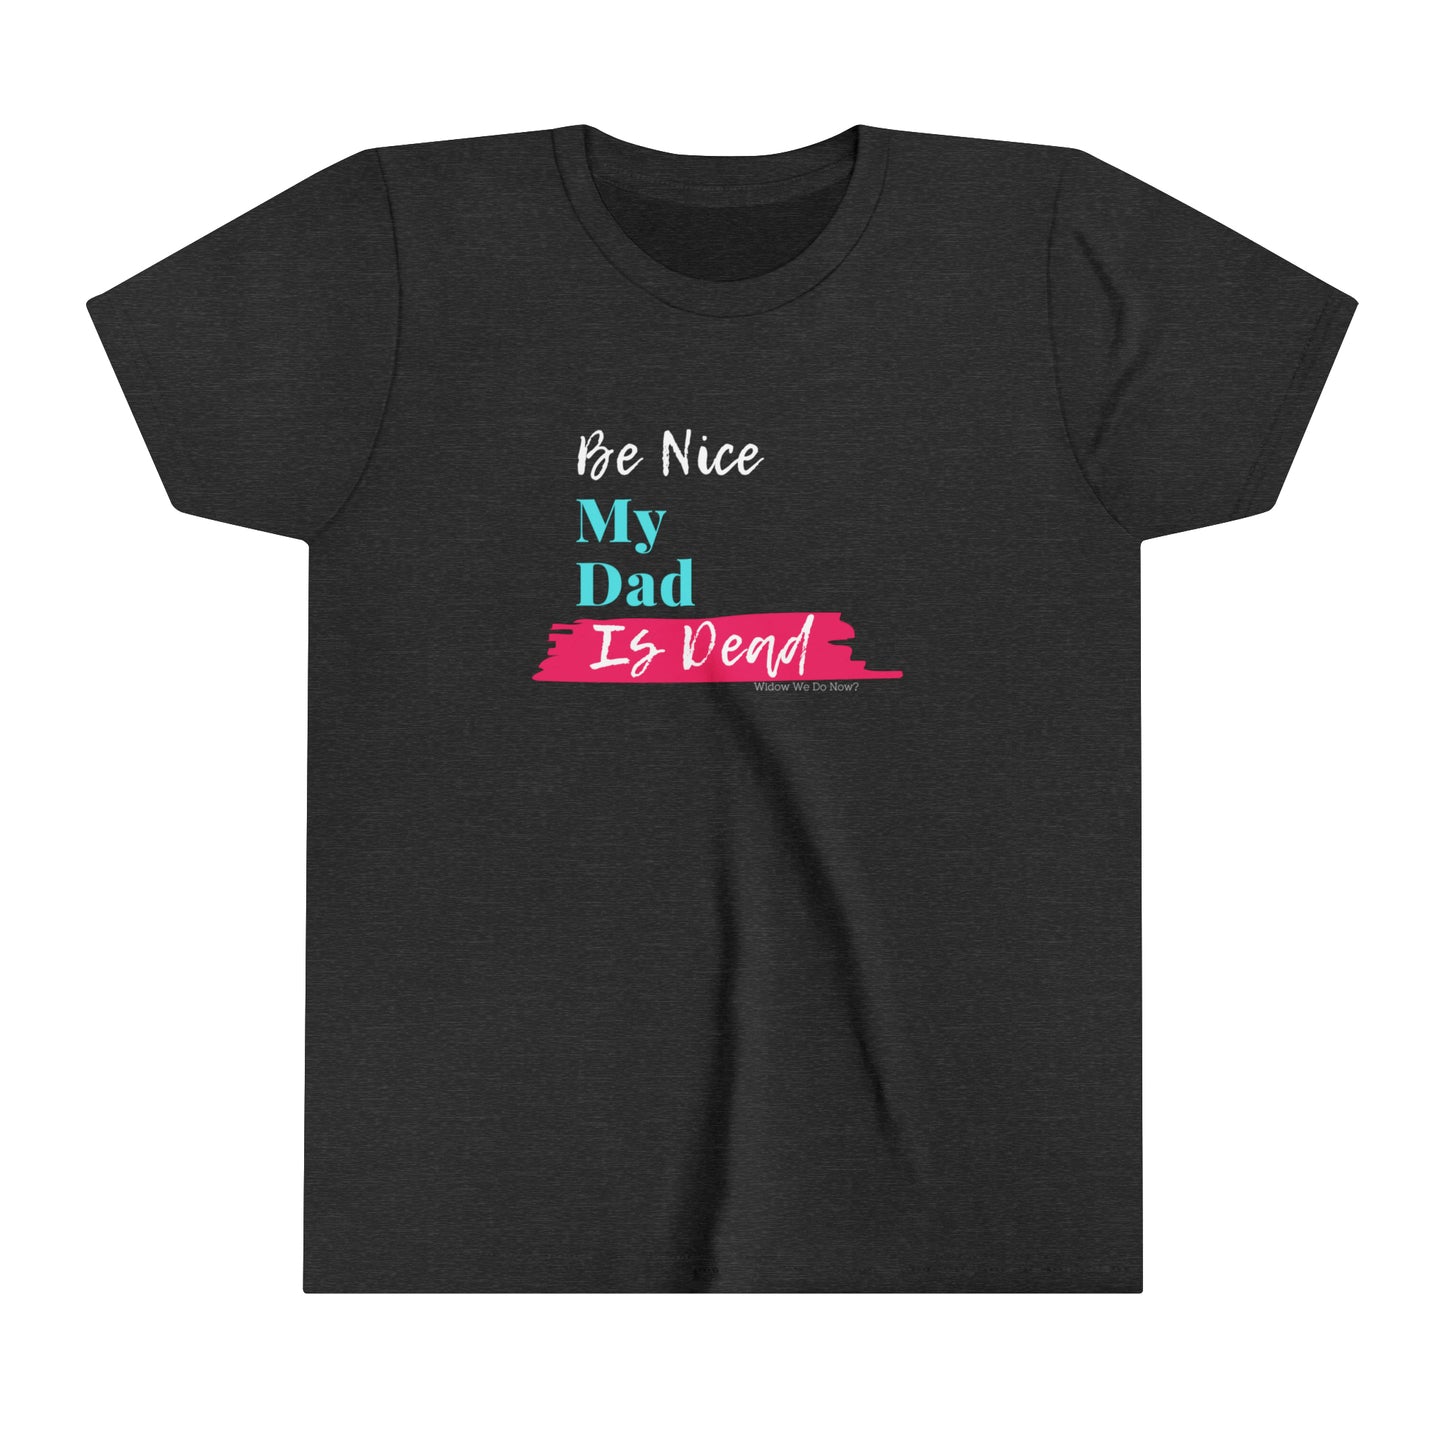 Be Nice My Dad Is Dead KIDS SIZES